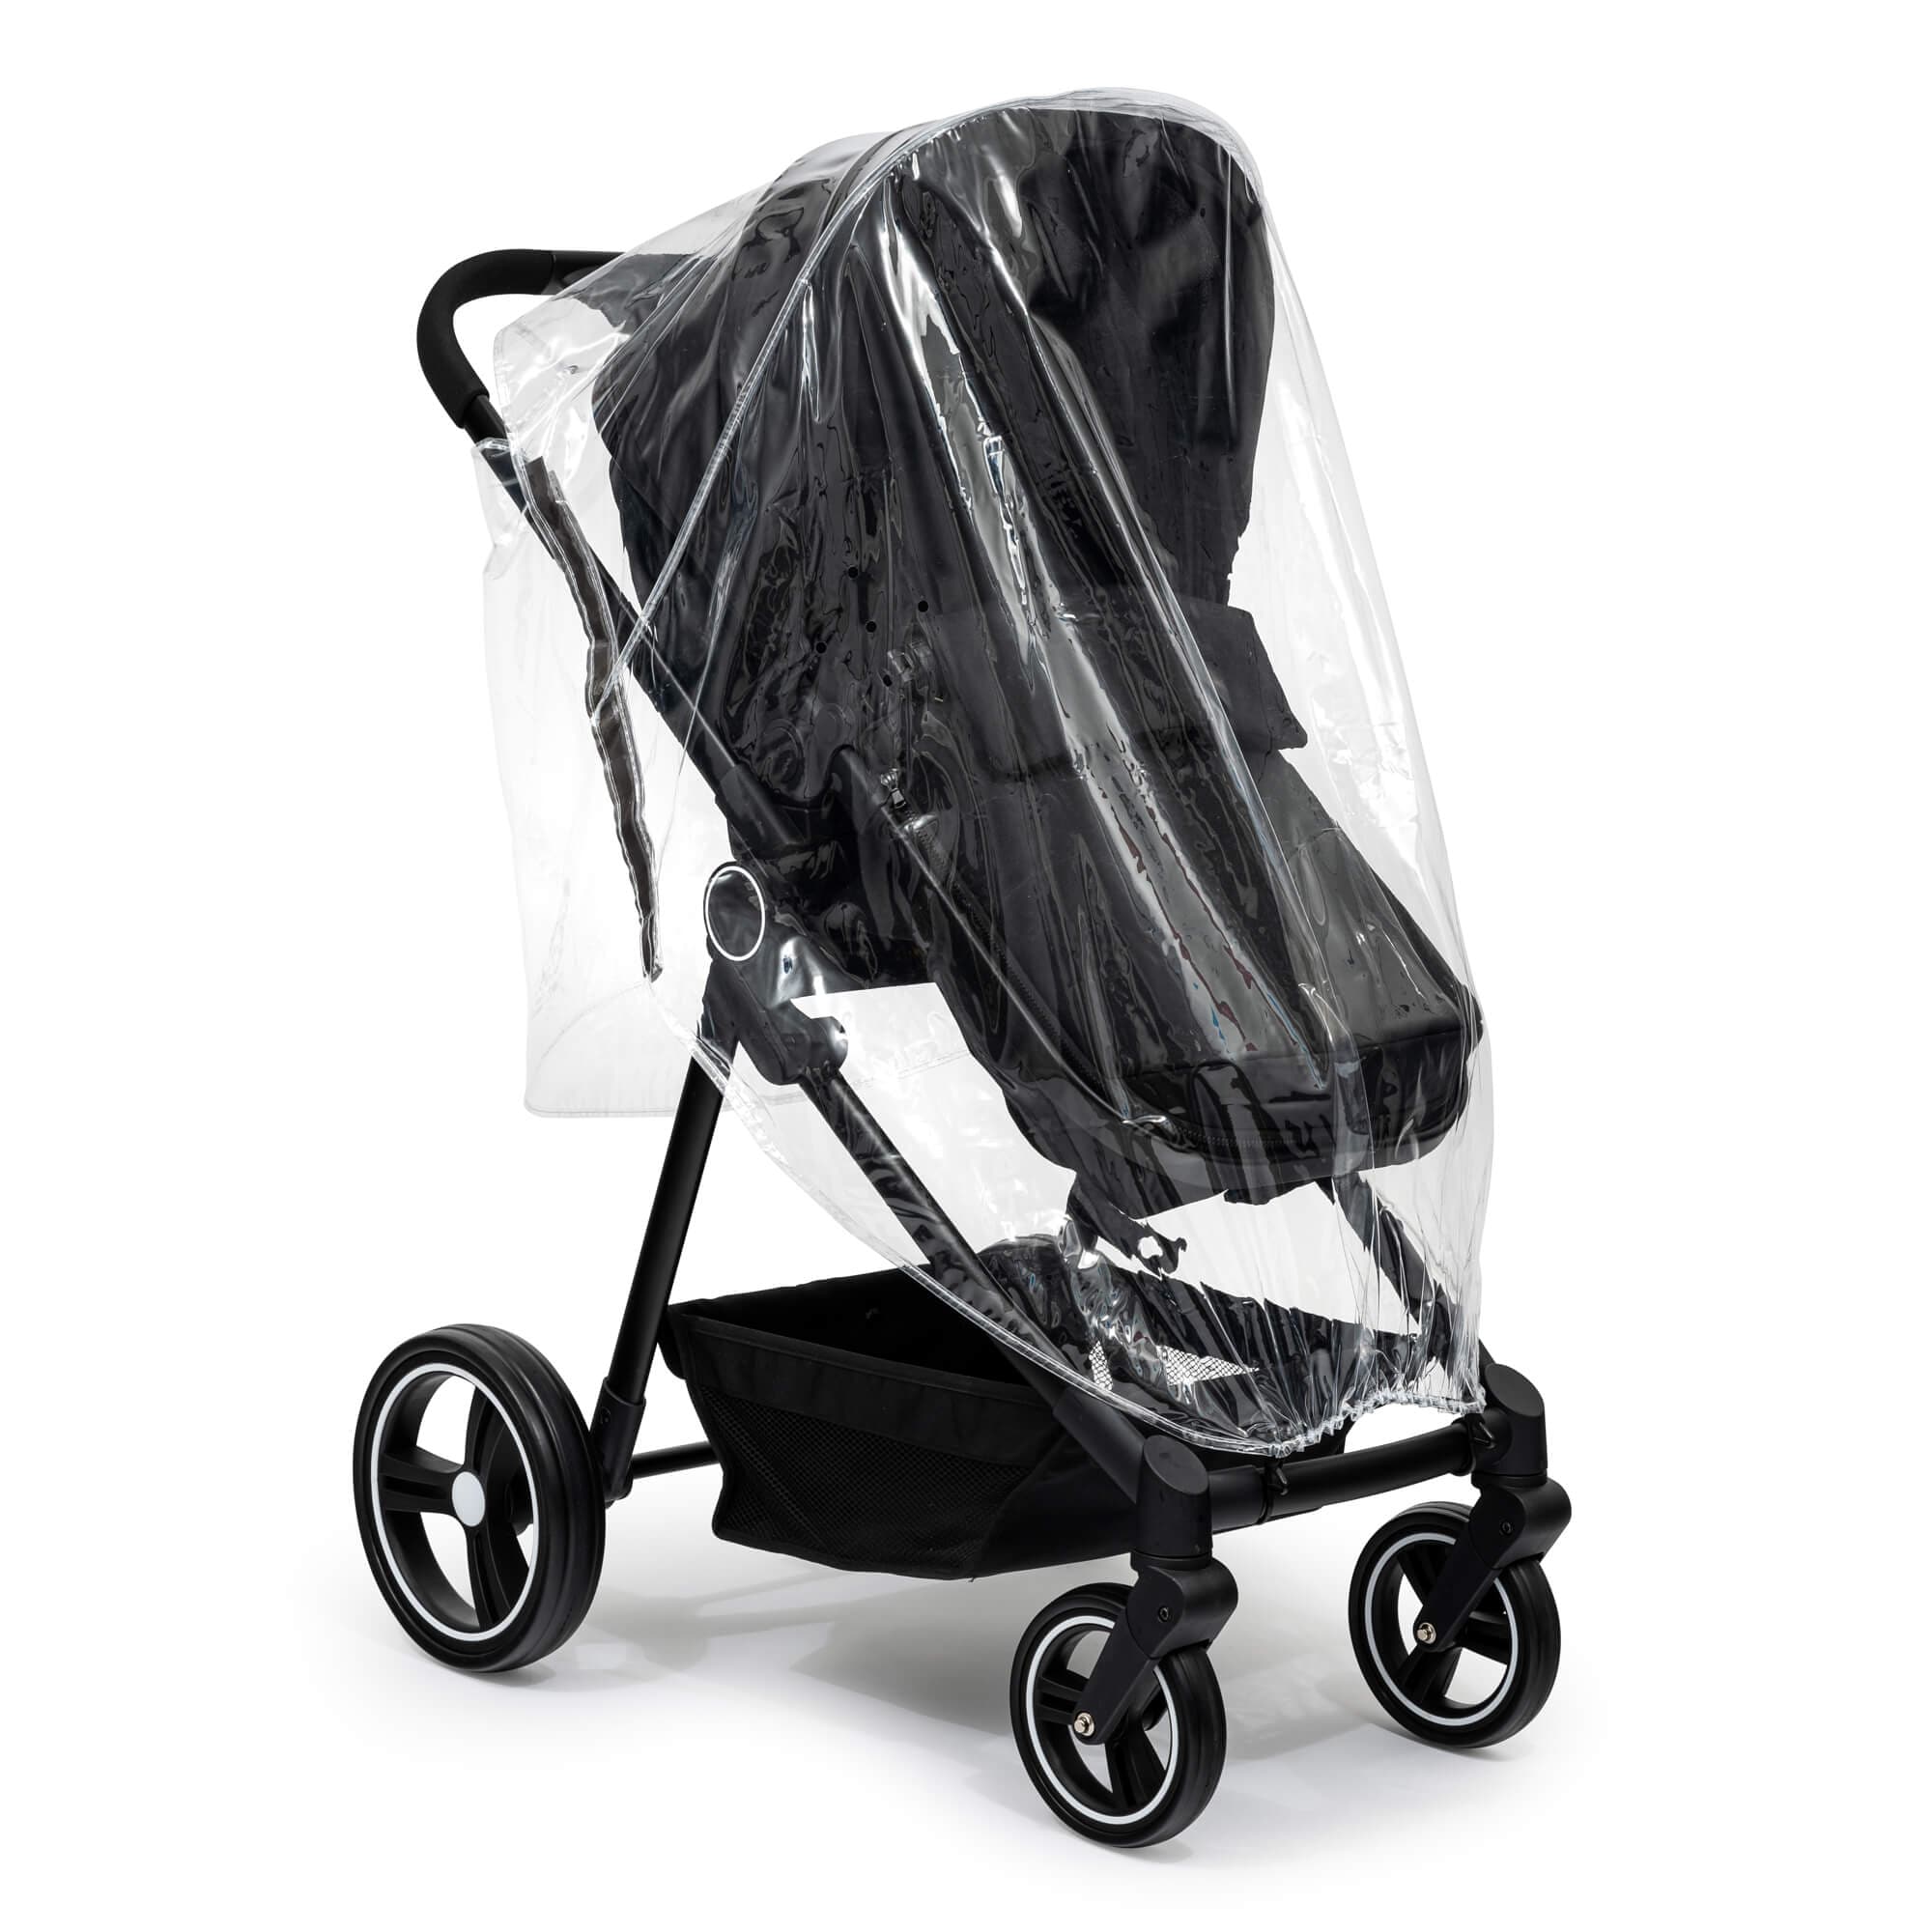 Pushchair Raincover Compatible With Easywalker - For Your Little One